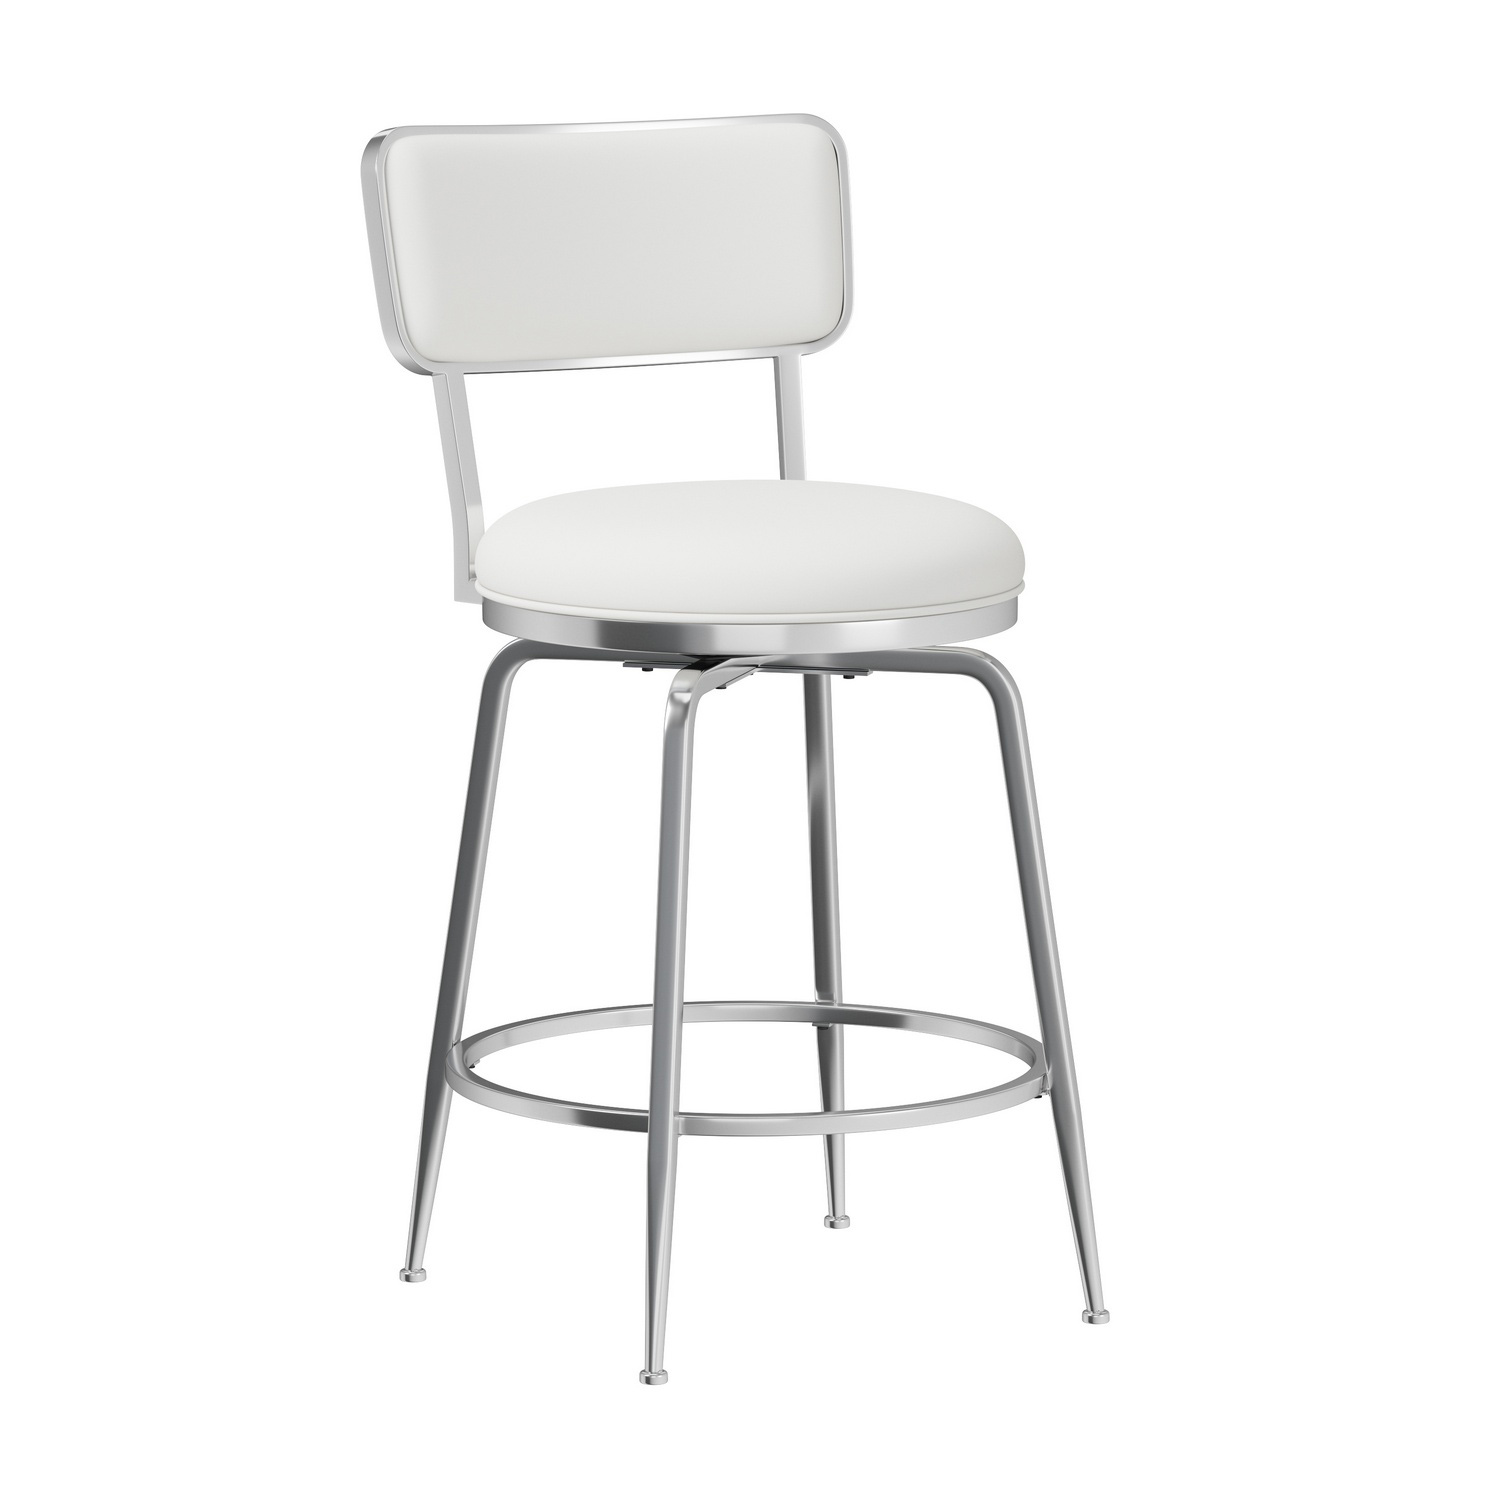 Hillsdale Baltimore Metal and Upholstered Swivel Counter Height Stool - Chrome